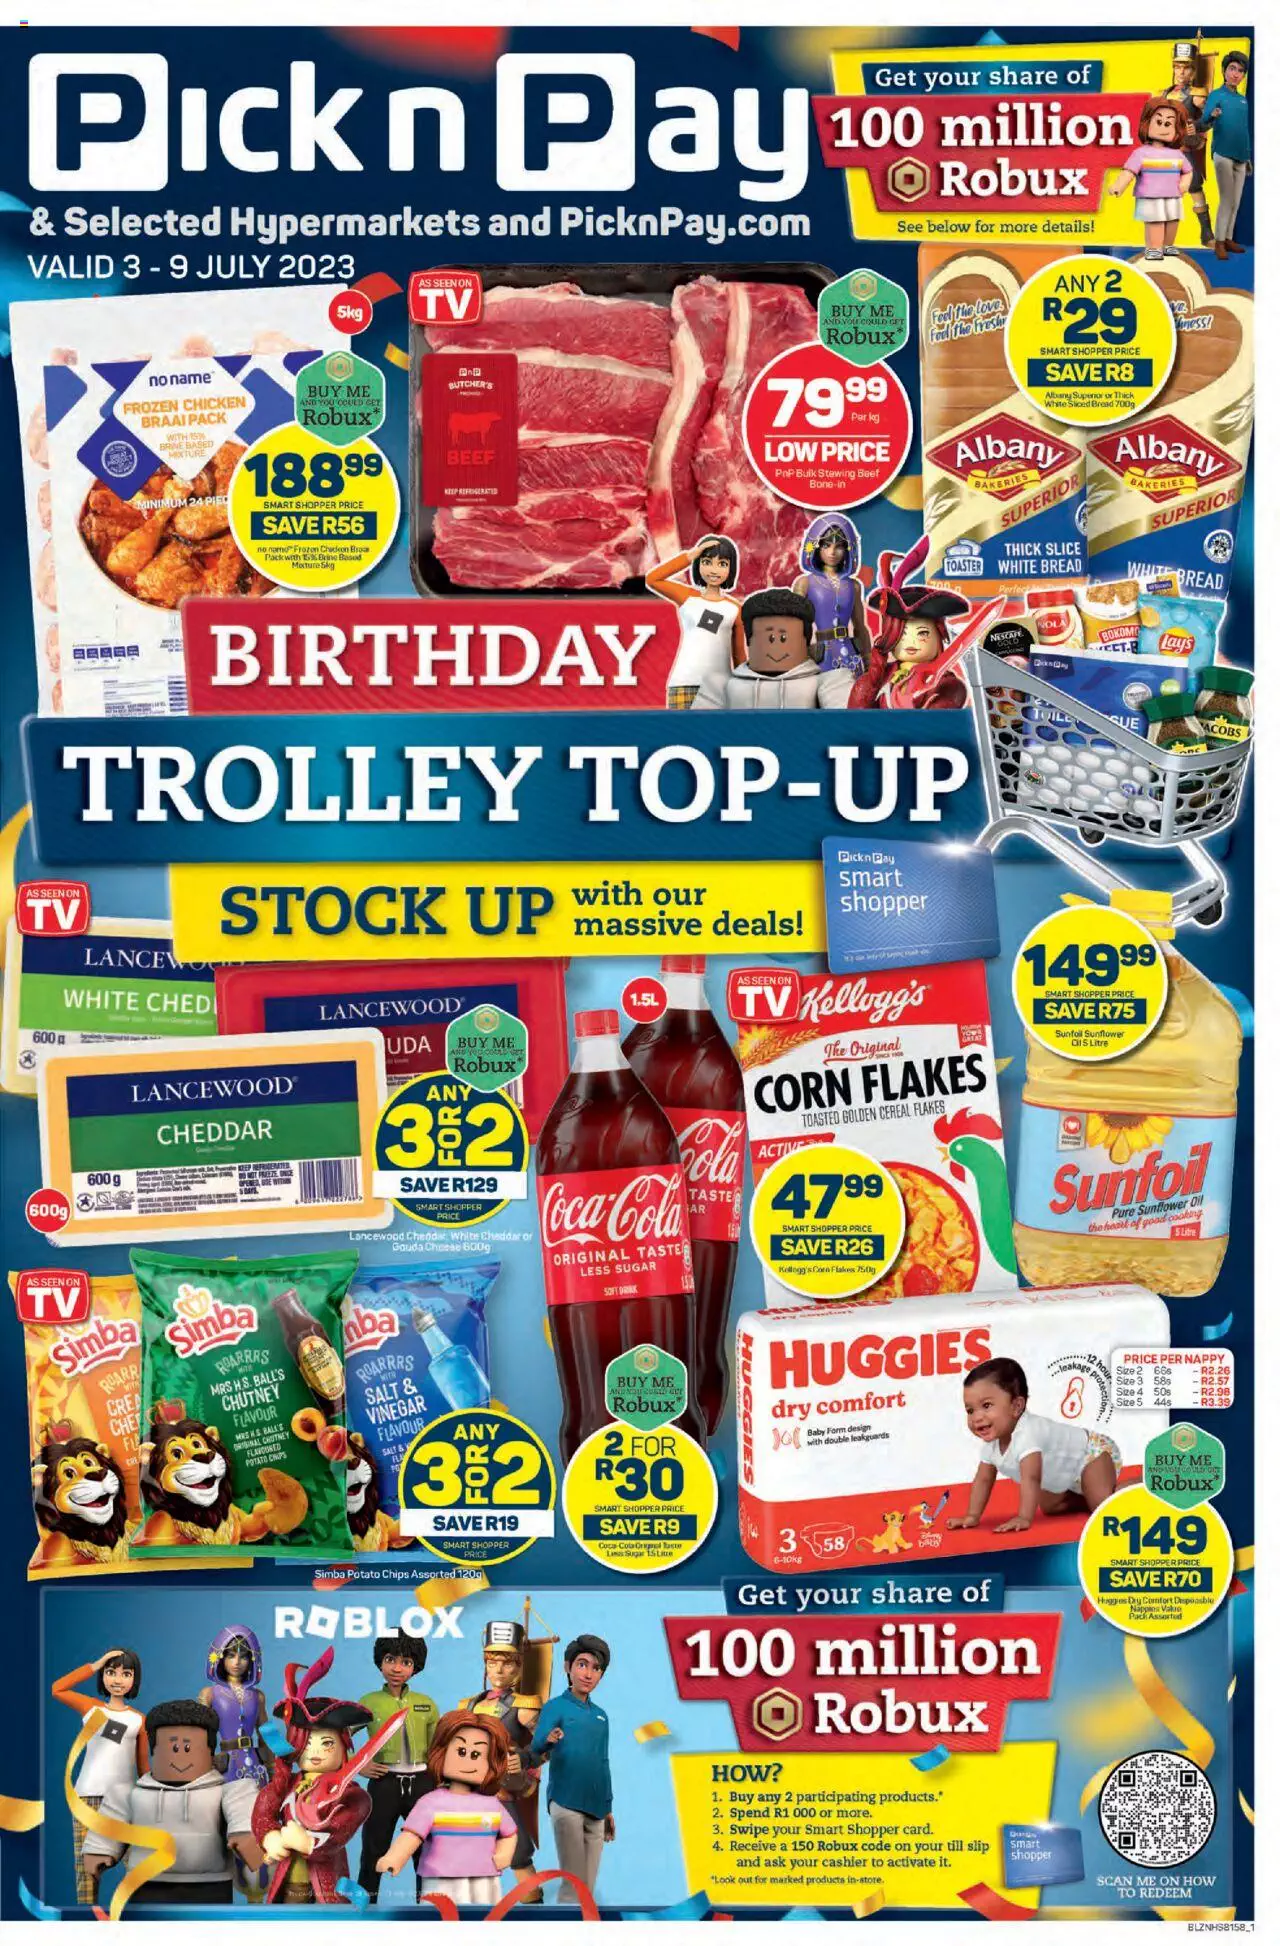 Pick n Pay Specials 3 – 9 July 2023